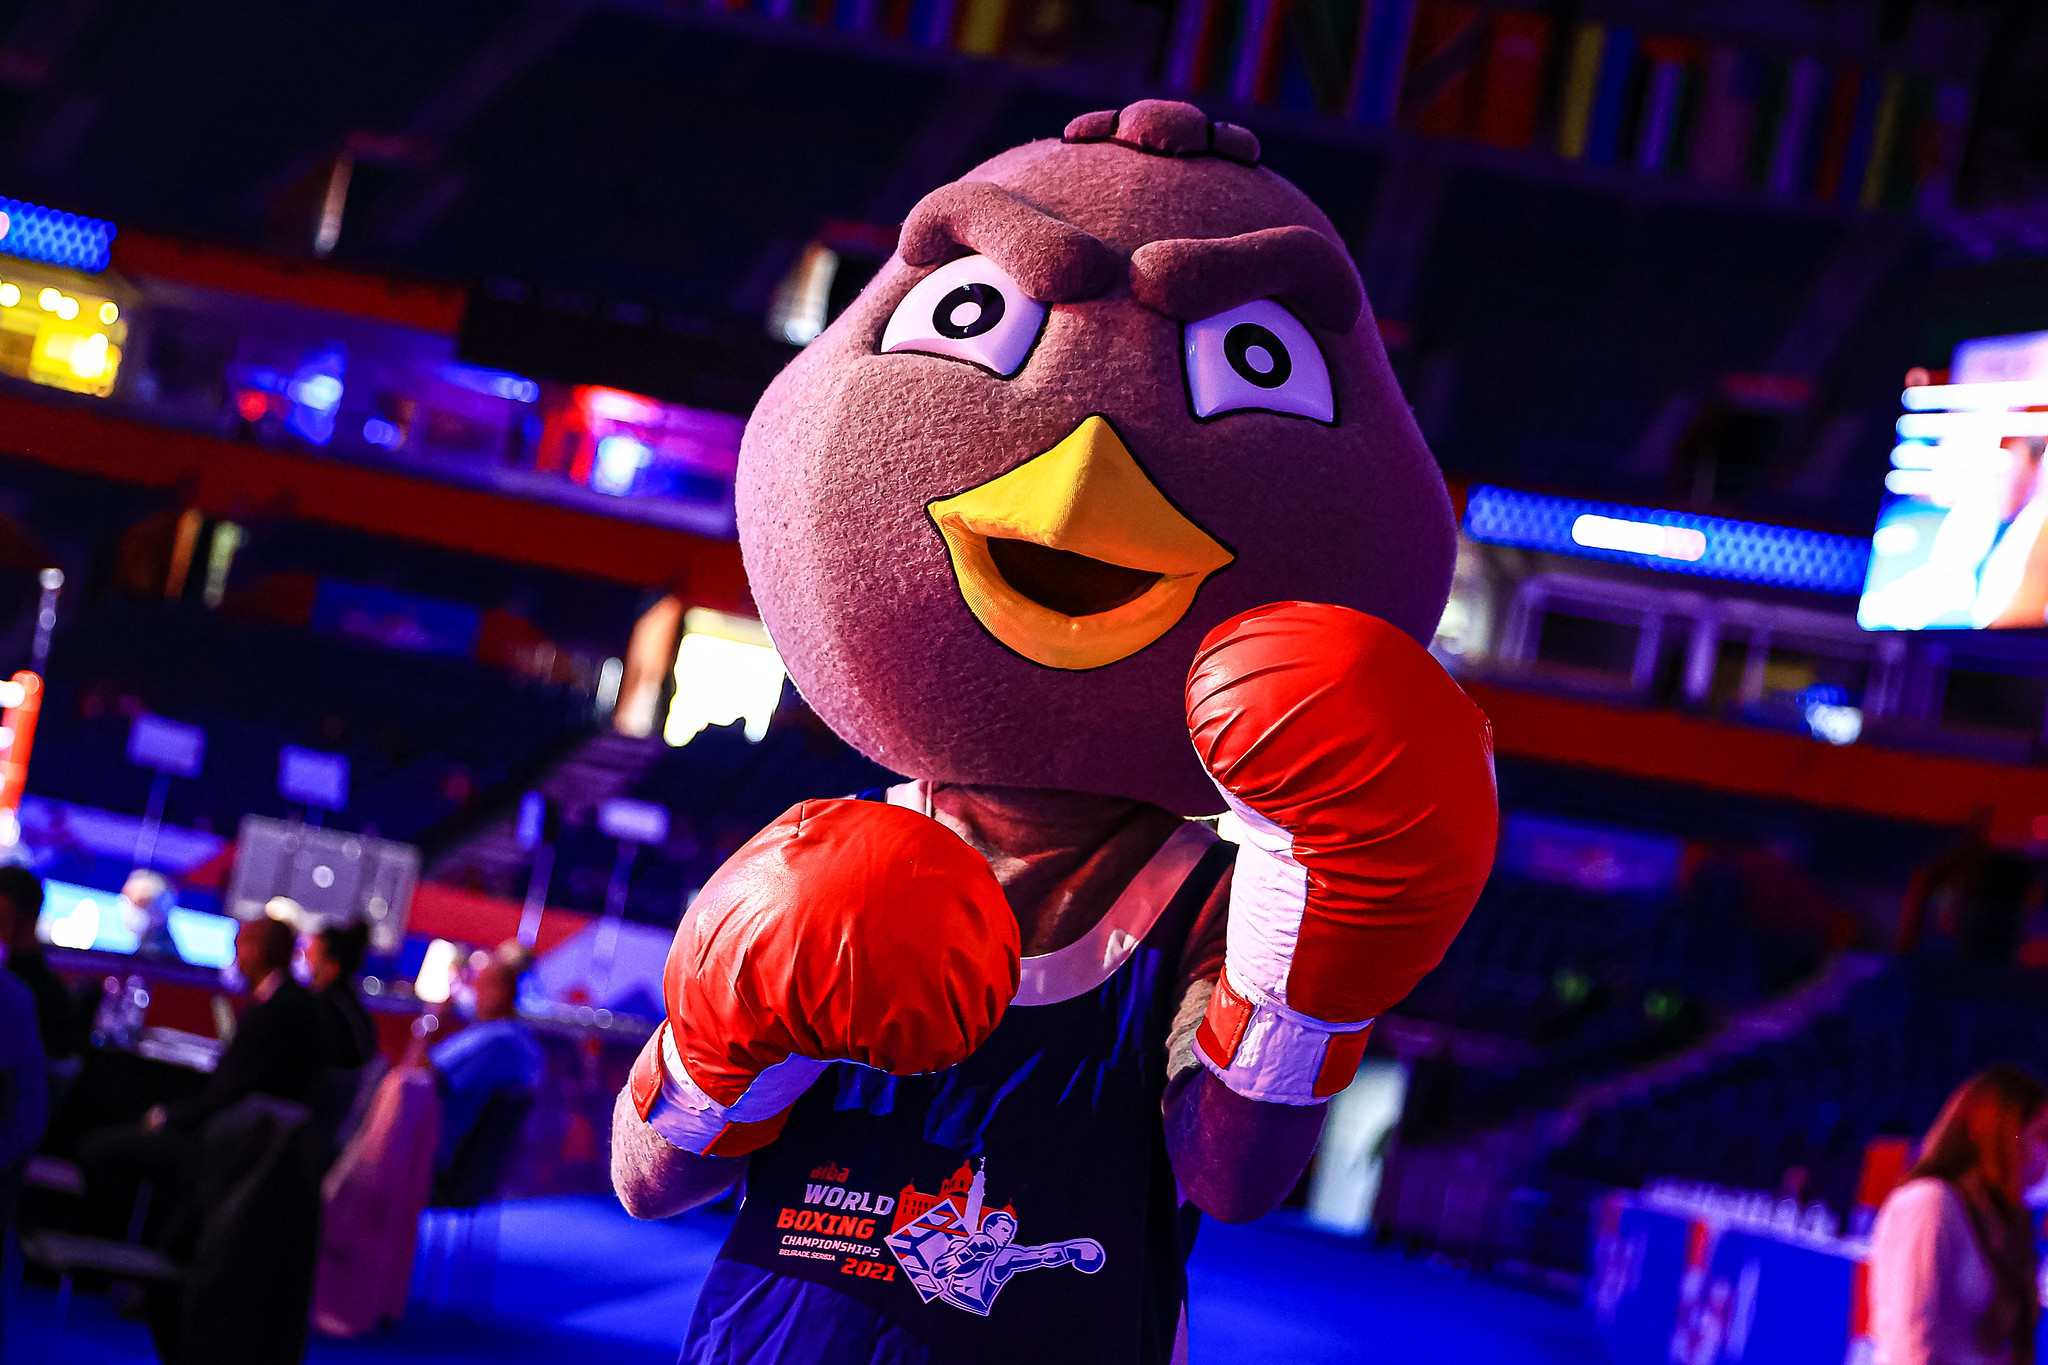 The mascot of the Men's World Boxing Championships strutted around the arena today ©AIBA